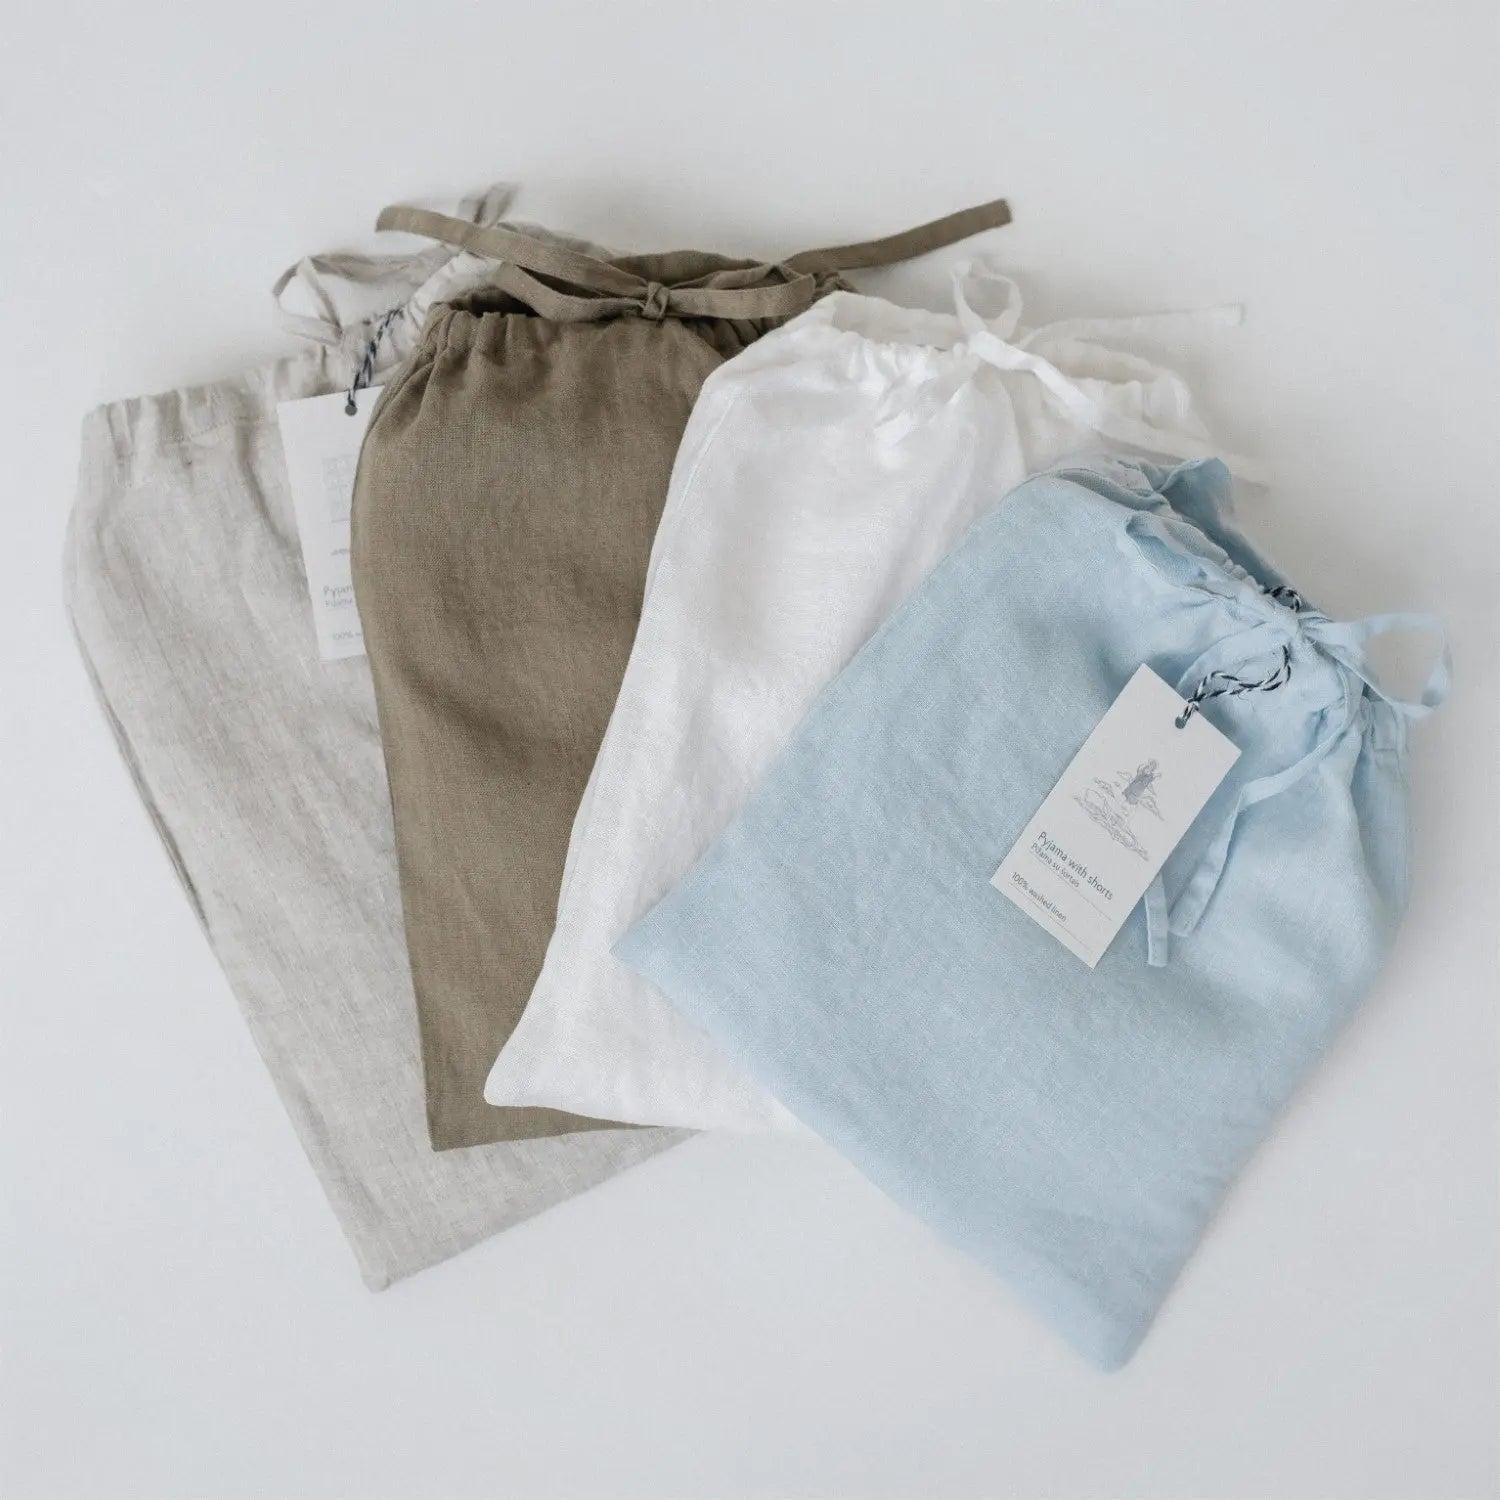 A group of linen Primrose loungewear set bags with tags, showcasing a classic comfort zone for sleeping and lounging. Handmade 100% linen, OEKO-TEX certified fabric in Optical White.